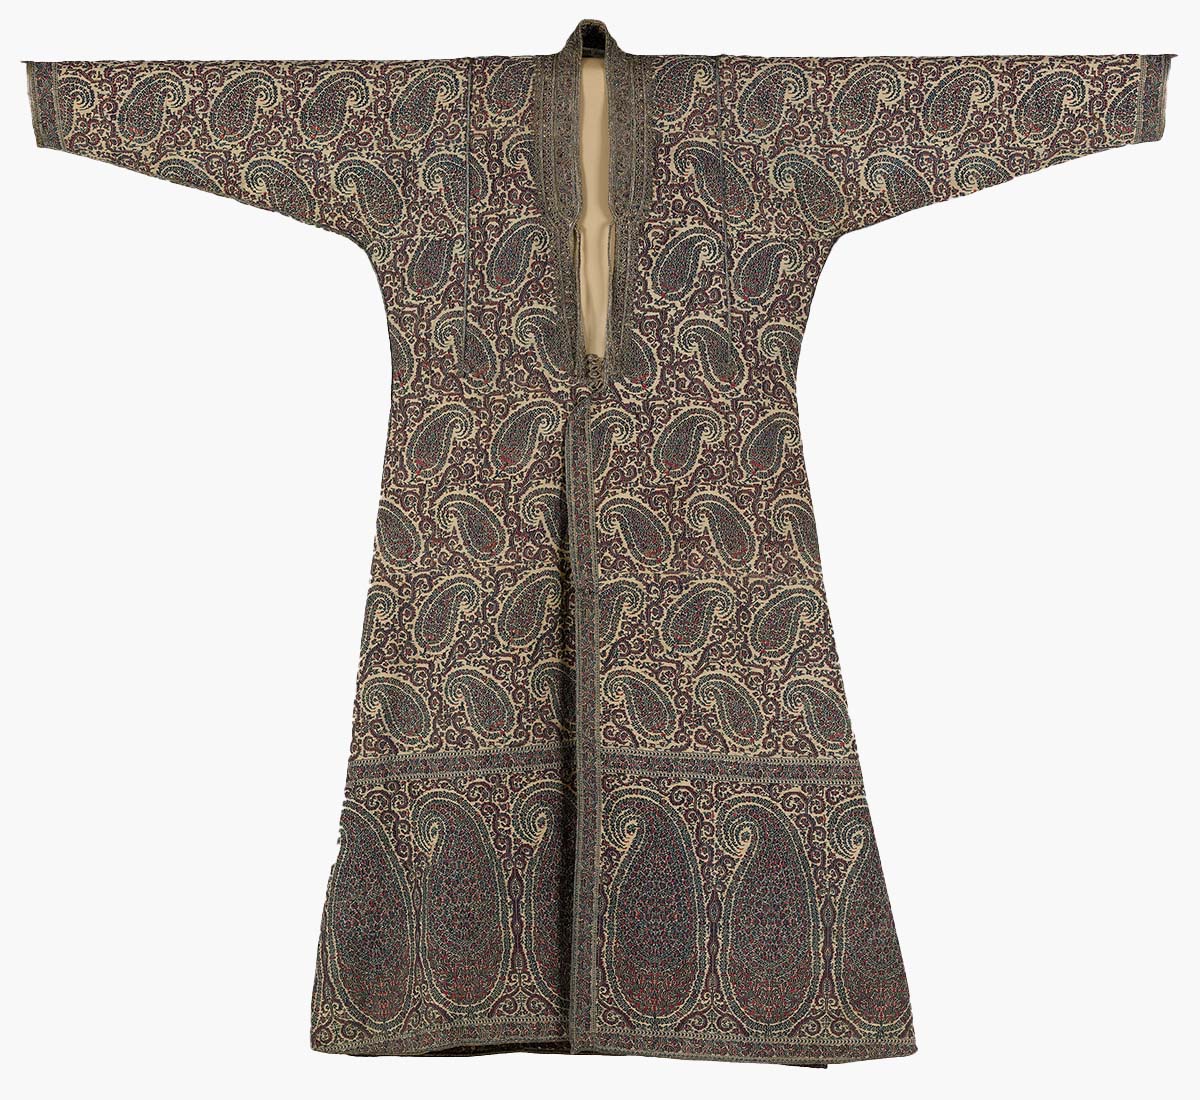 A coat-like outerwear garment with full-sleeves, brocaded and bordered with elongated paisley motifs.